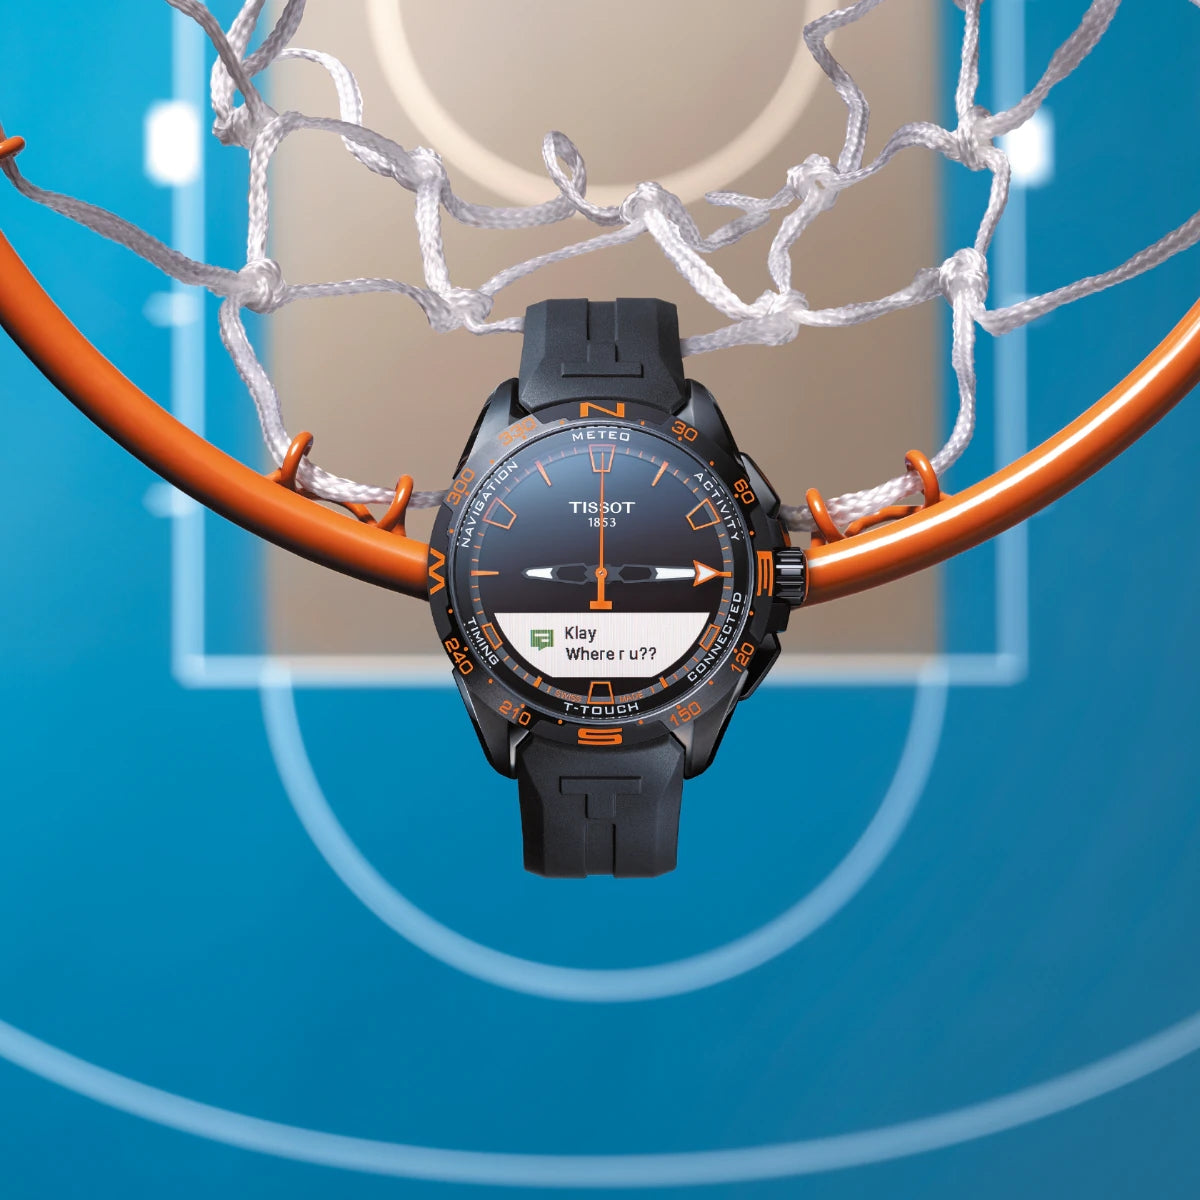 Tissot T-Touch Connected Watch with orange details on basketball hoop background